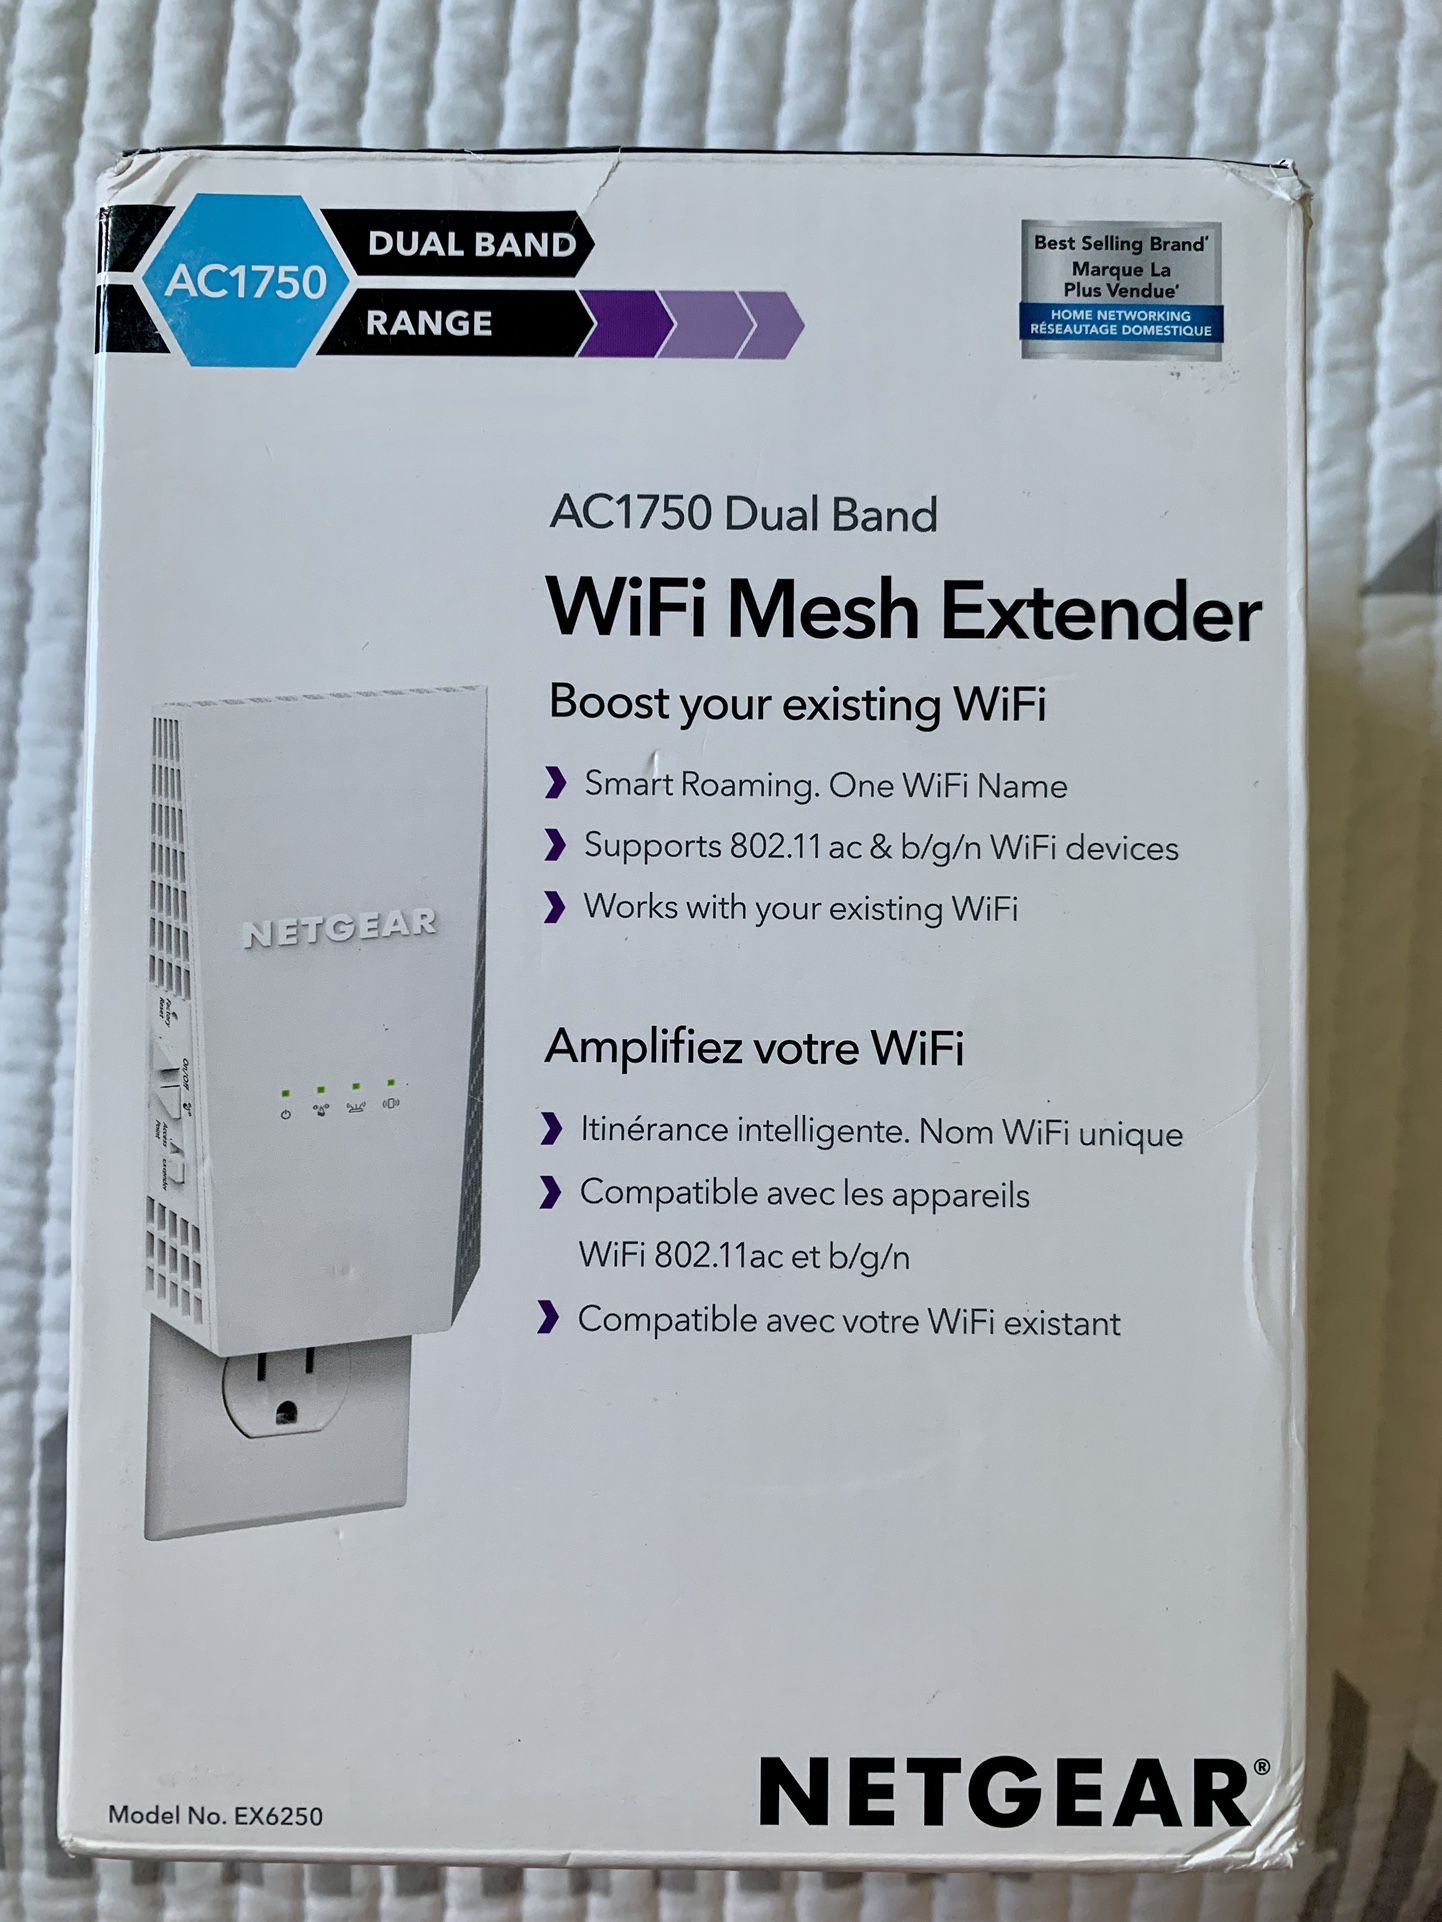 NETGEAR WiFi Mesh Range Extender EX6250 - Coverage up to 2000 sq.ft. and 32 devices with AC1750 Dual